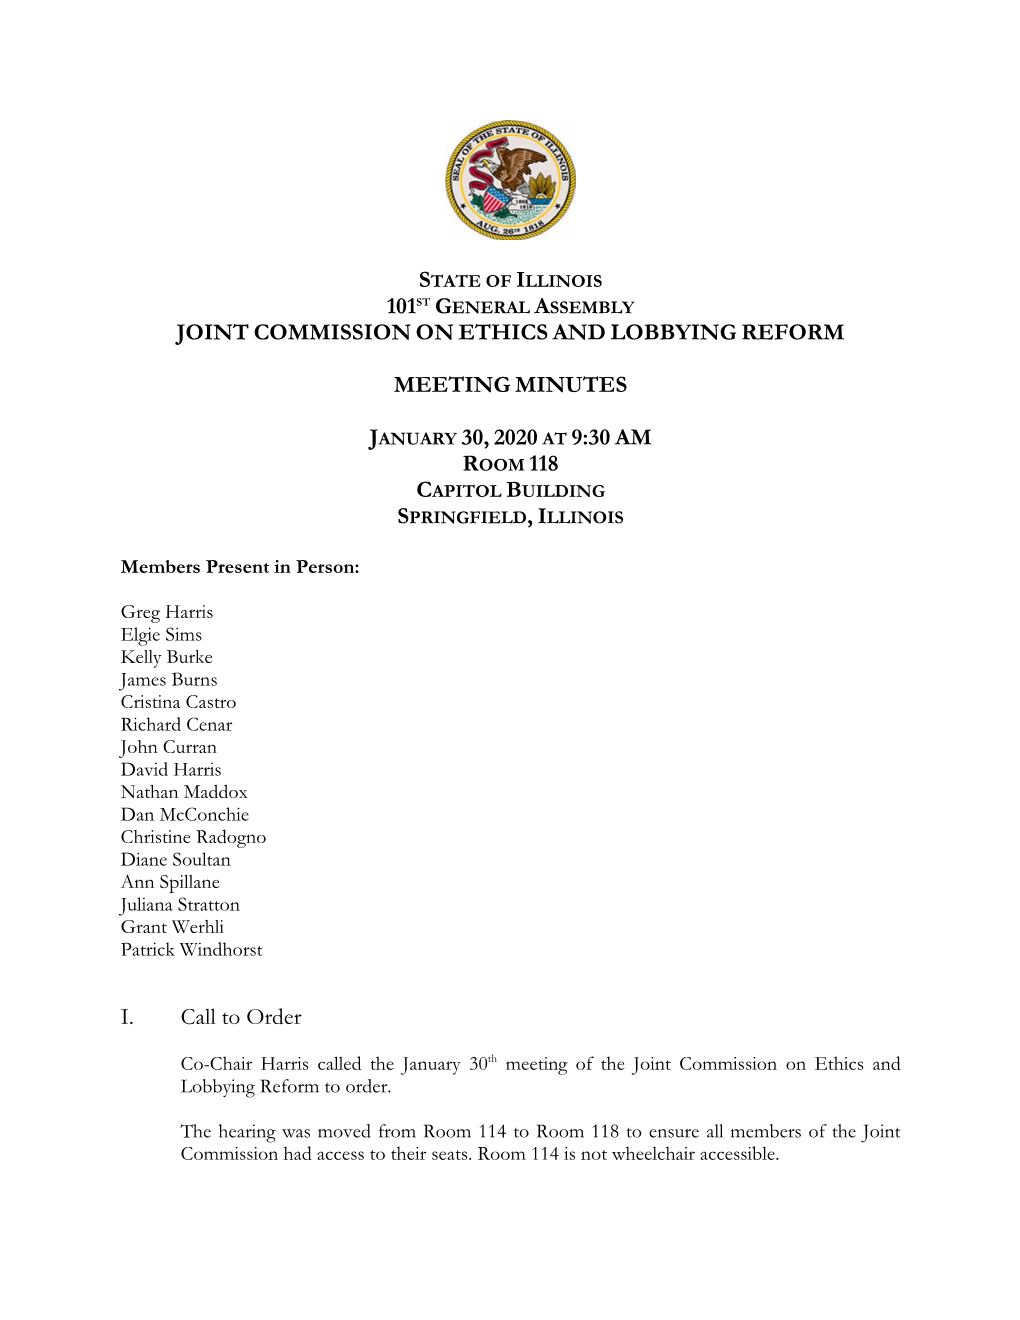 Joint Commission Minutes for January 30, 2020 Meeting